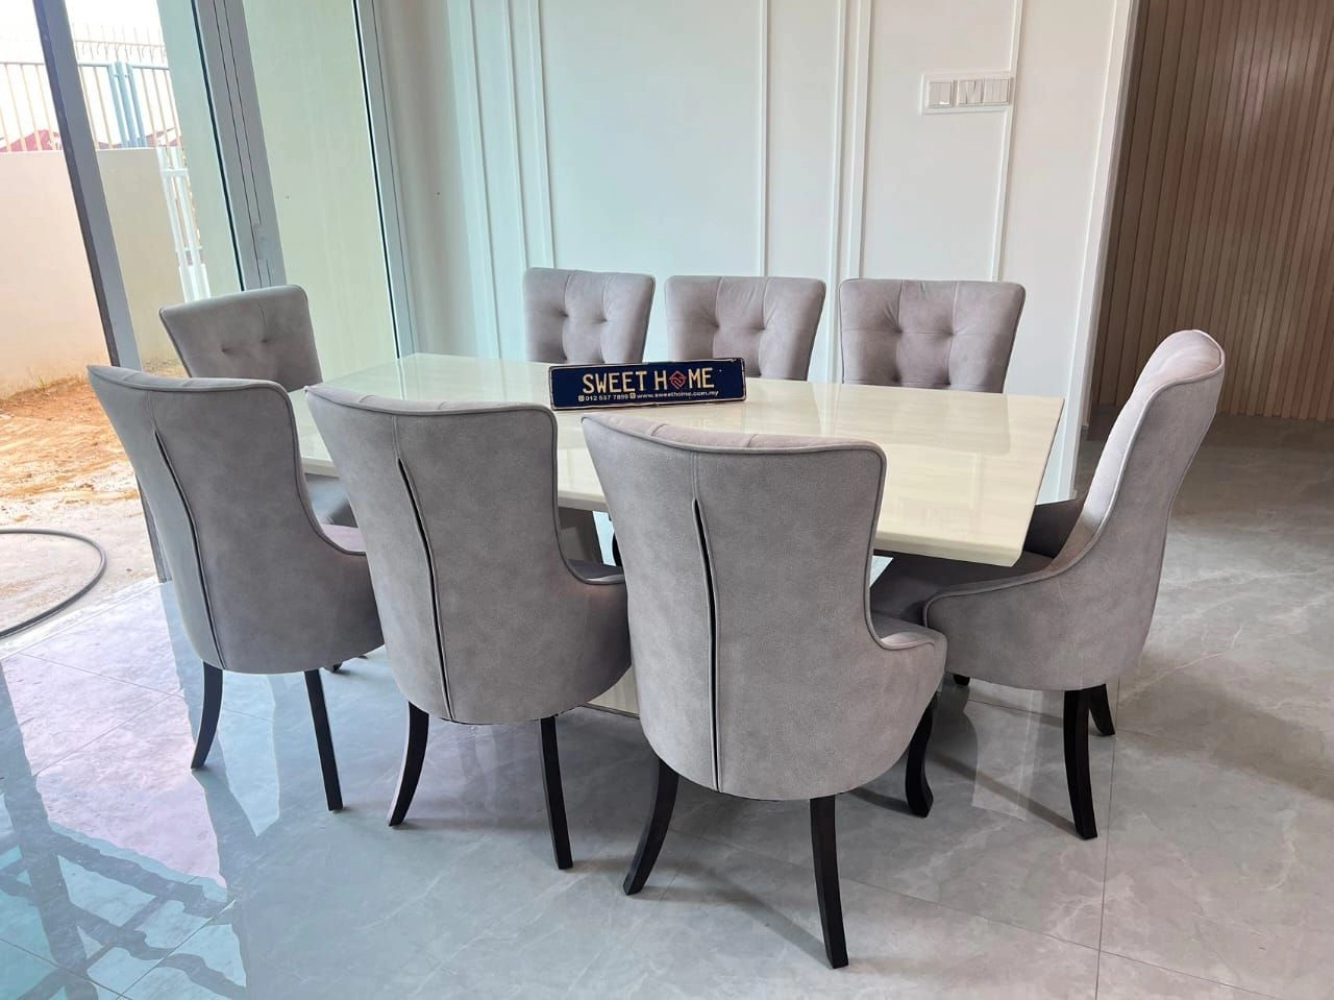 8 Seater Dining Seater | Marble Table Unique Leg Design | Highback Dining Chair |Dining Room | Meja Kerusi Makan Moden